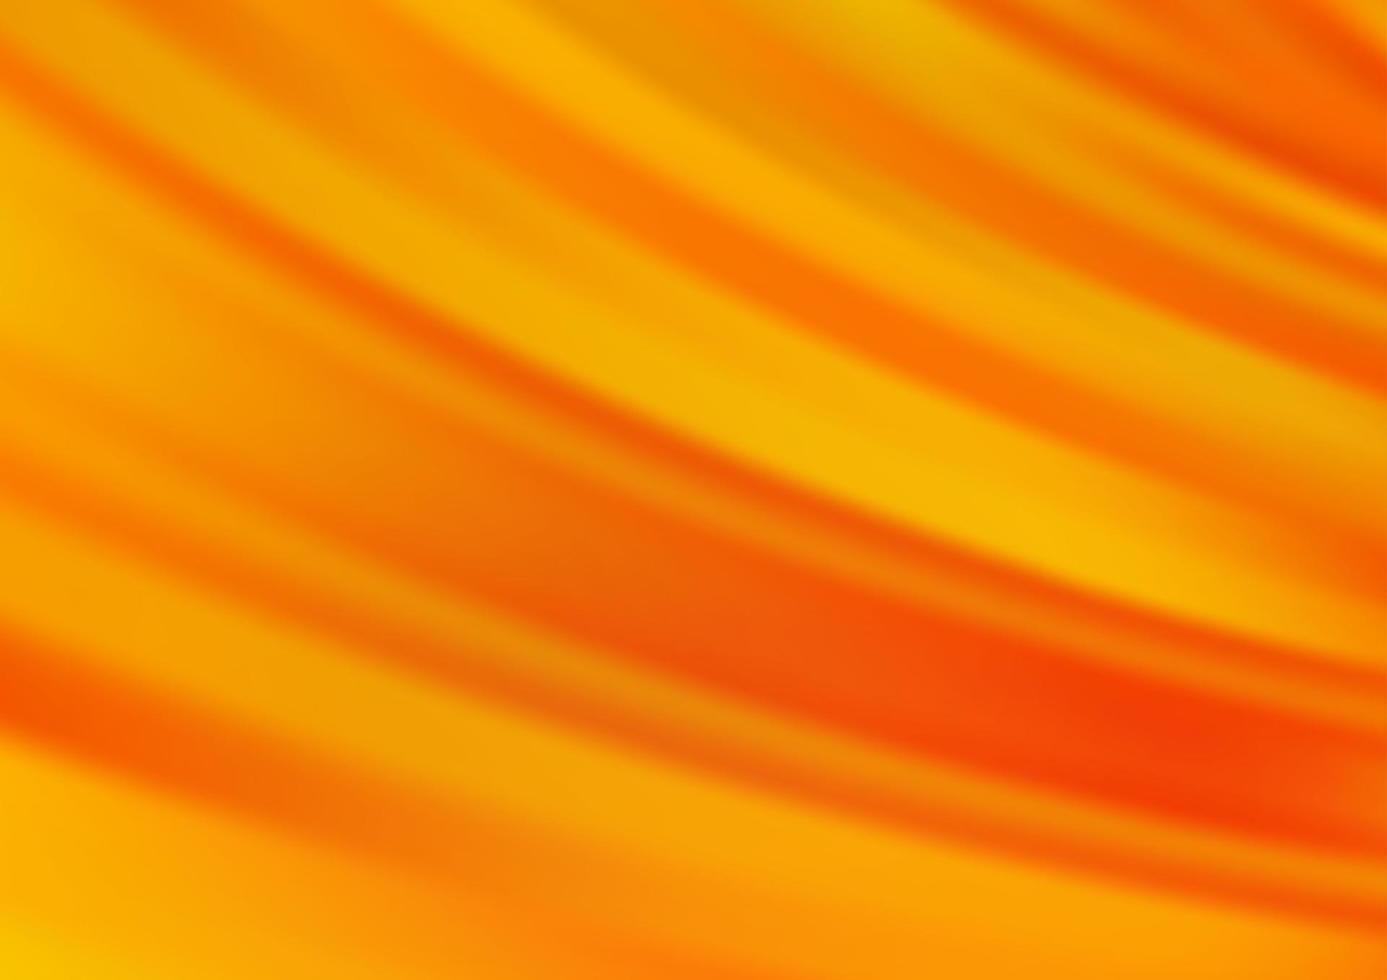 Light Orange vector texture with colored lines.